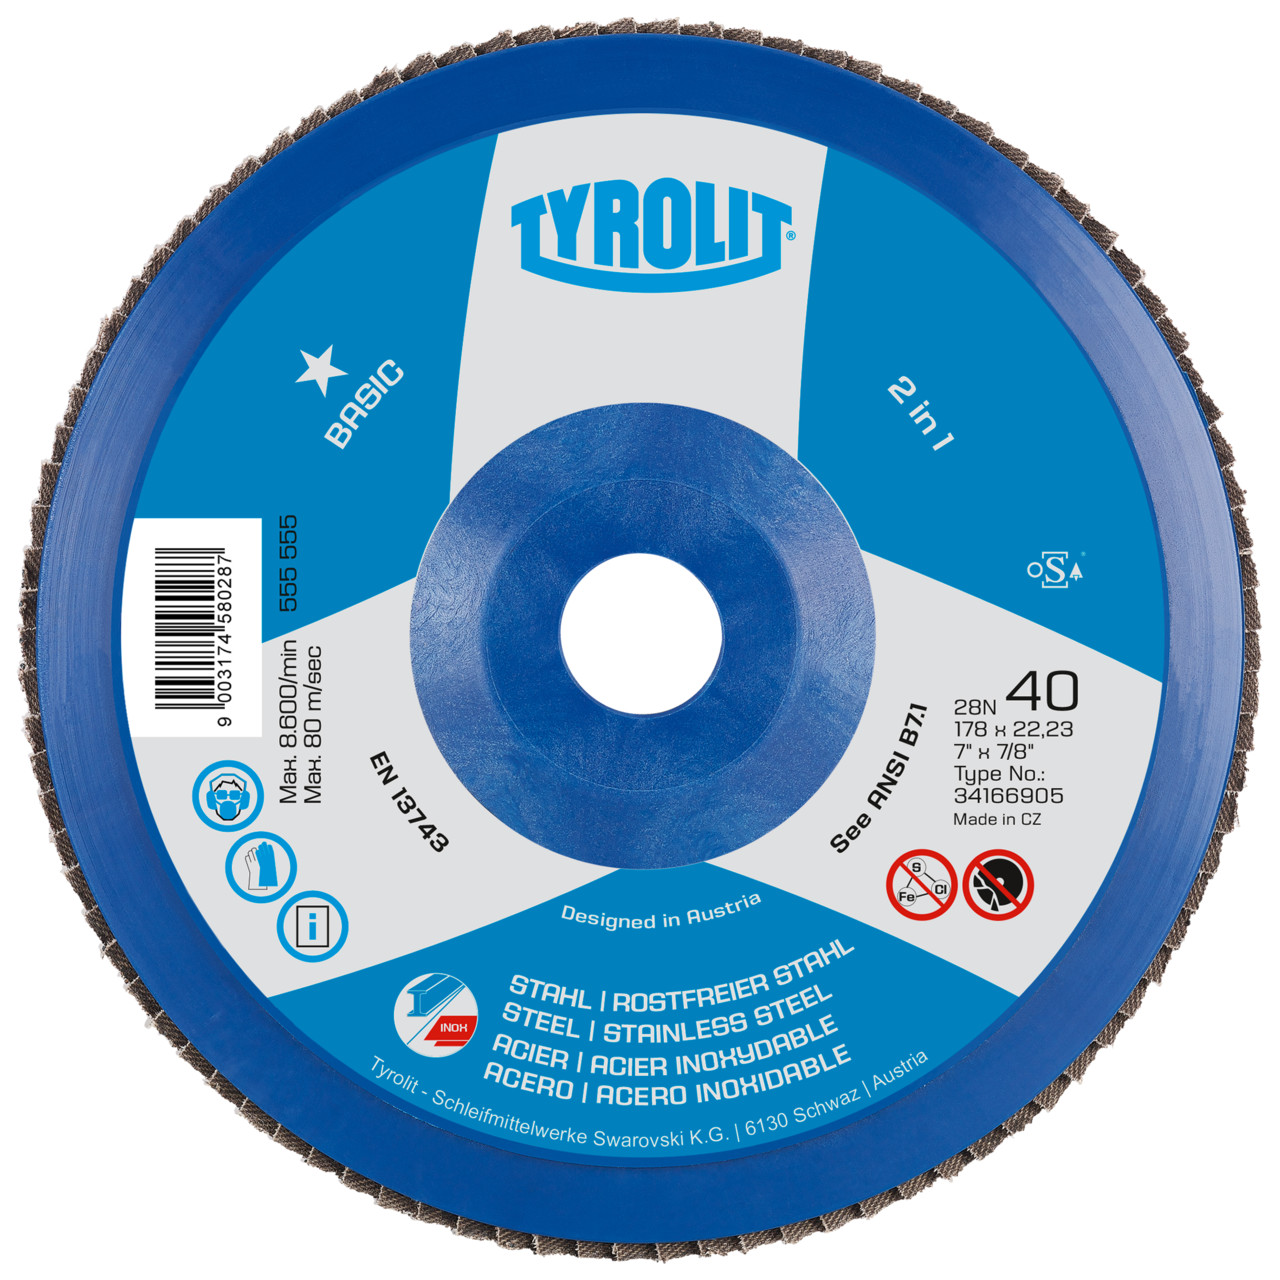 Tyrolit Serrated lock washer DxH 115x22.23 2in1 for steel &amp; stainless steel, P40, shape: 28N - straight version (plastic carrier body), Art. 34318568